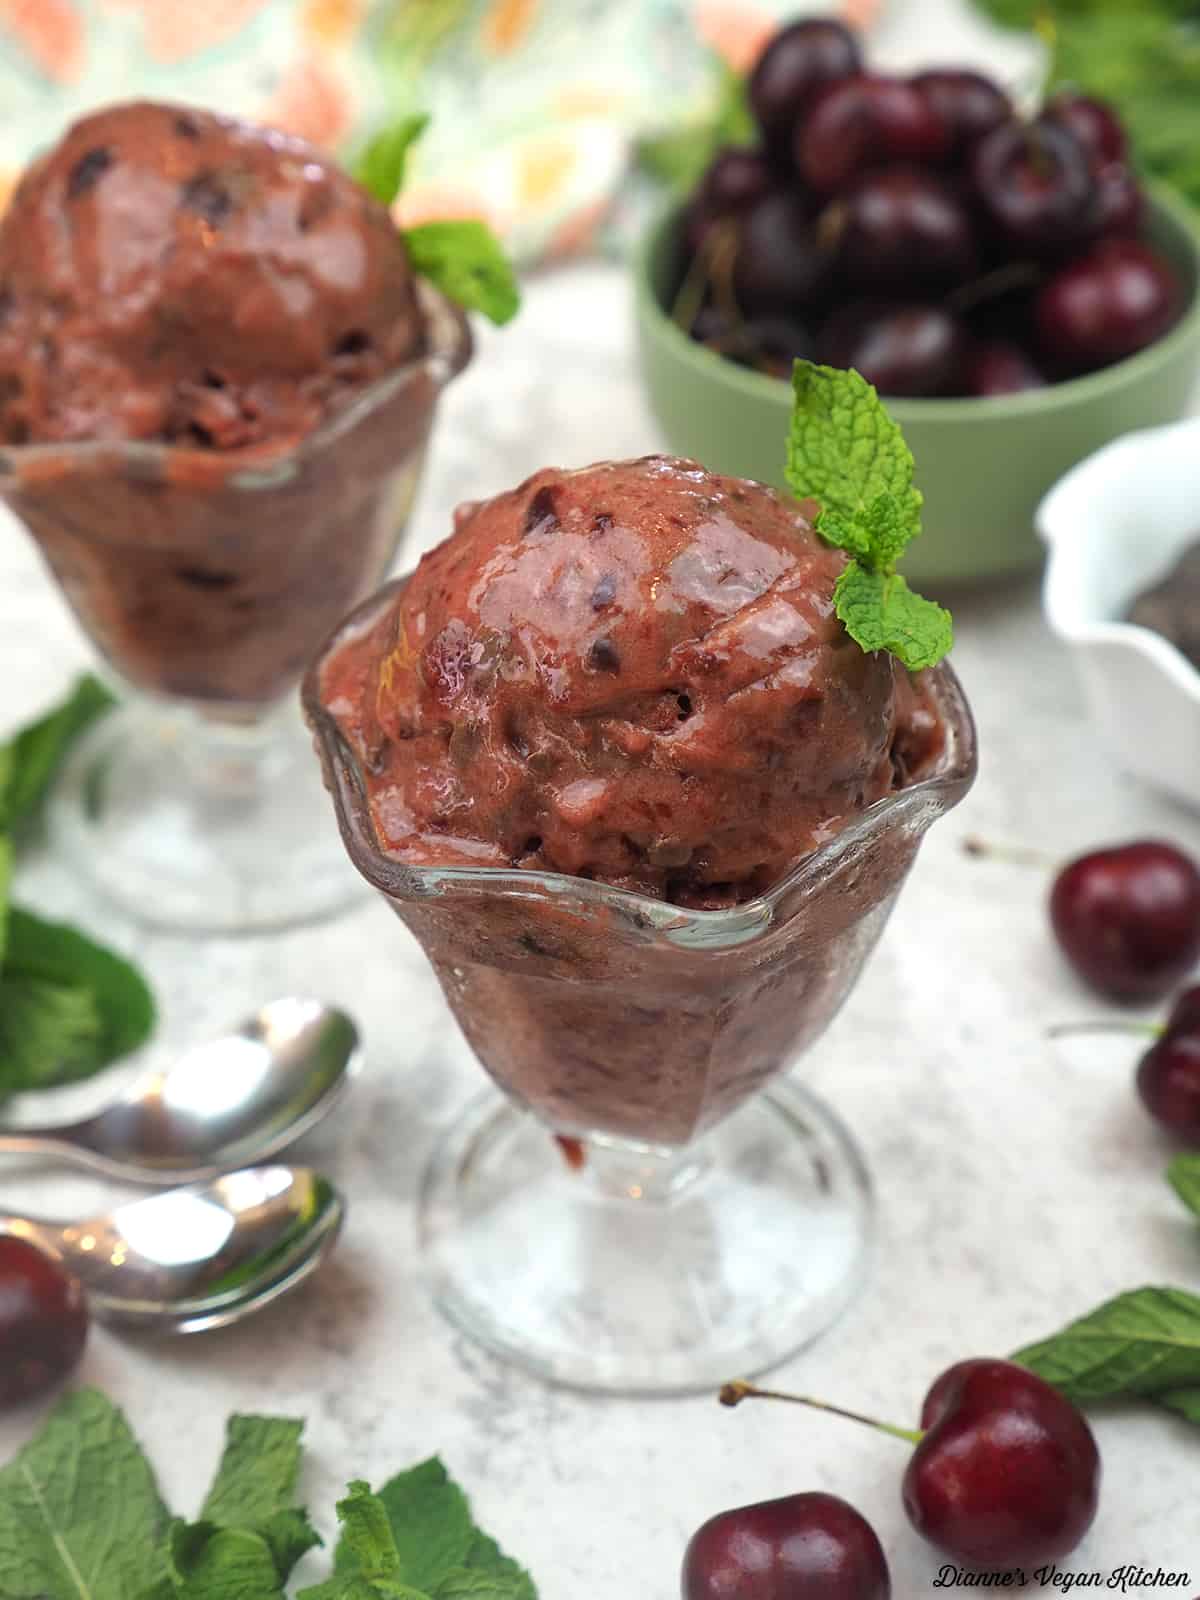 Chocolate Cherry Nice Cream with cherries, chocolate chips, and mint leaves